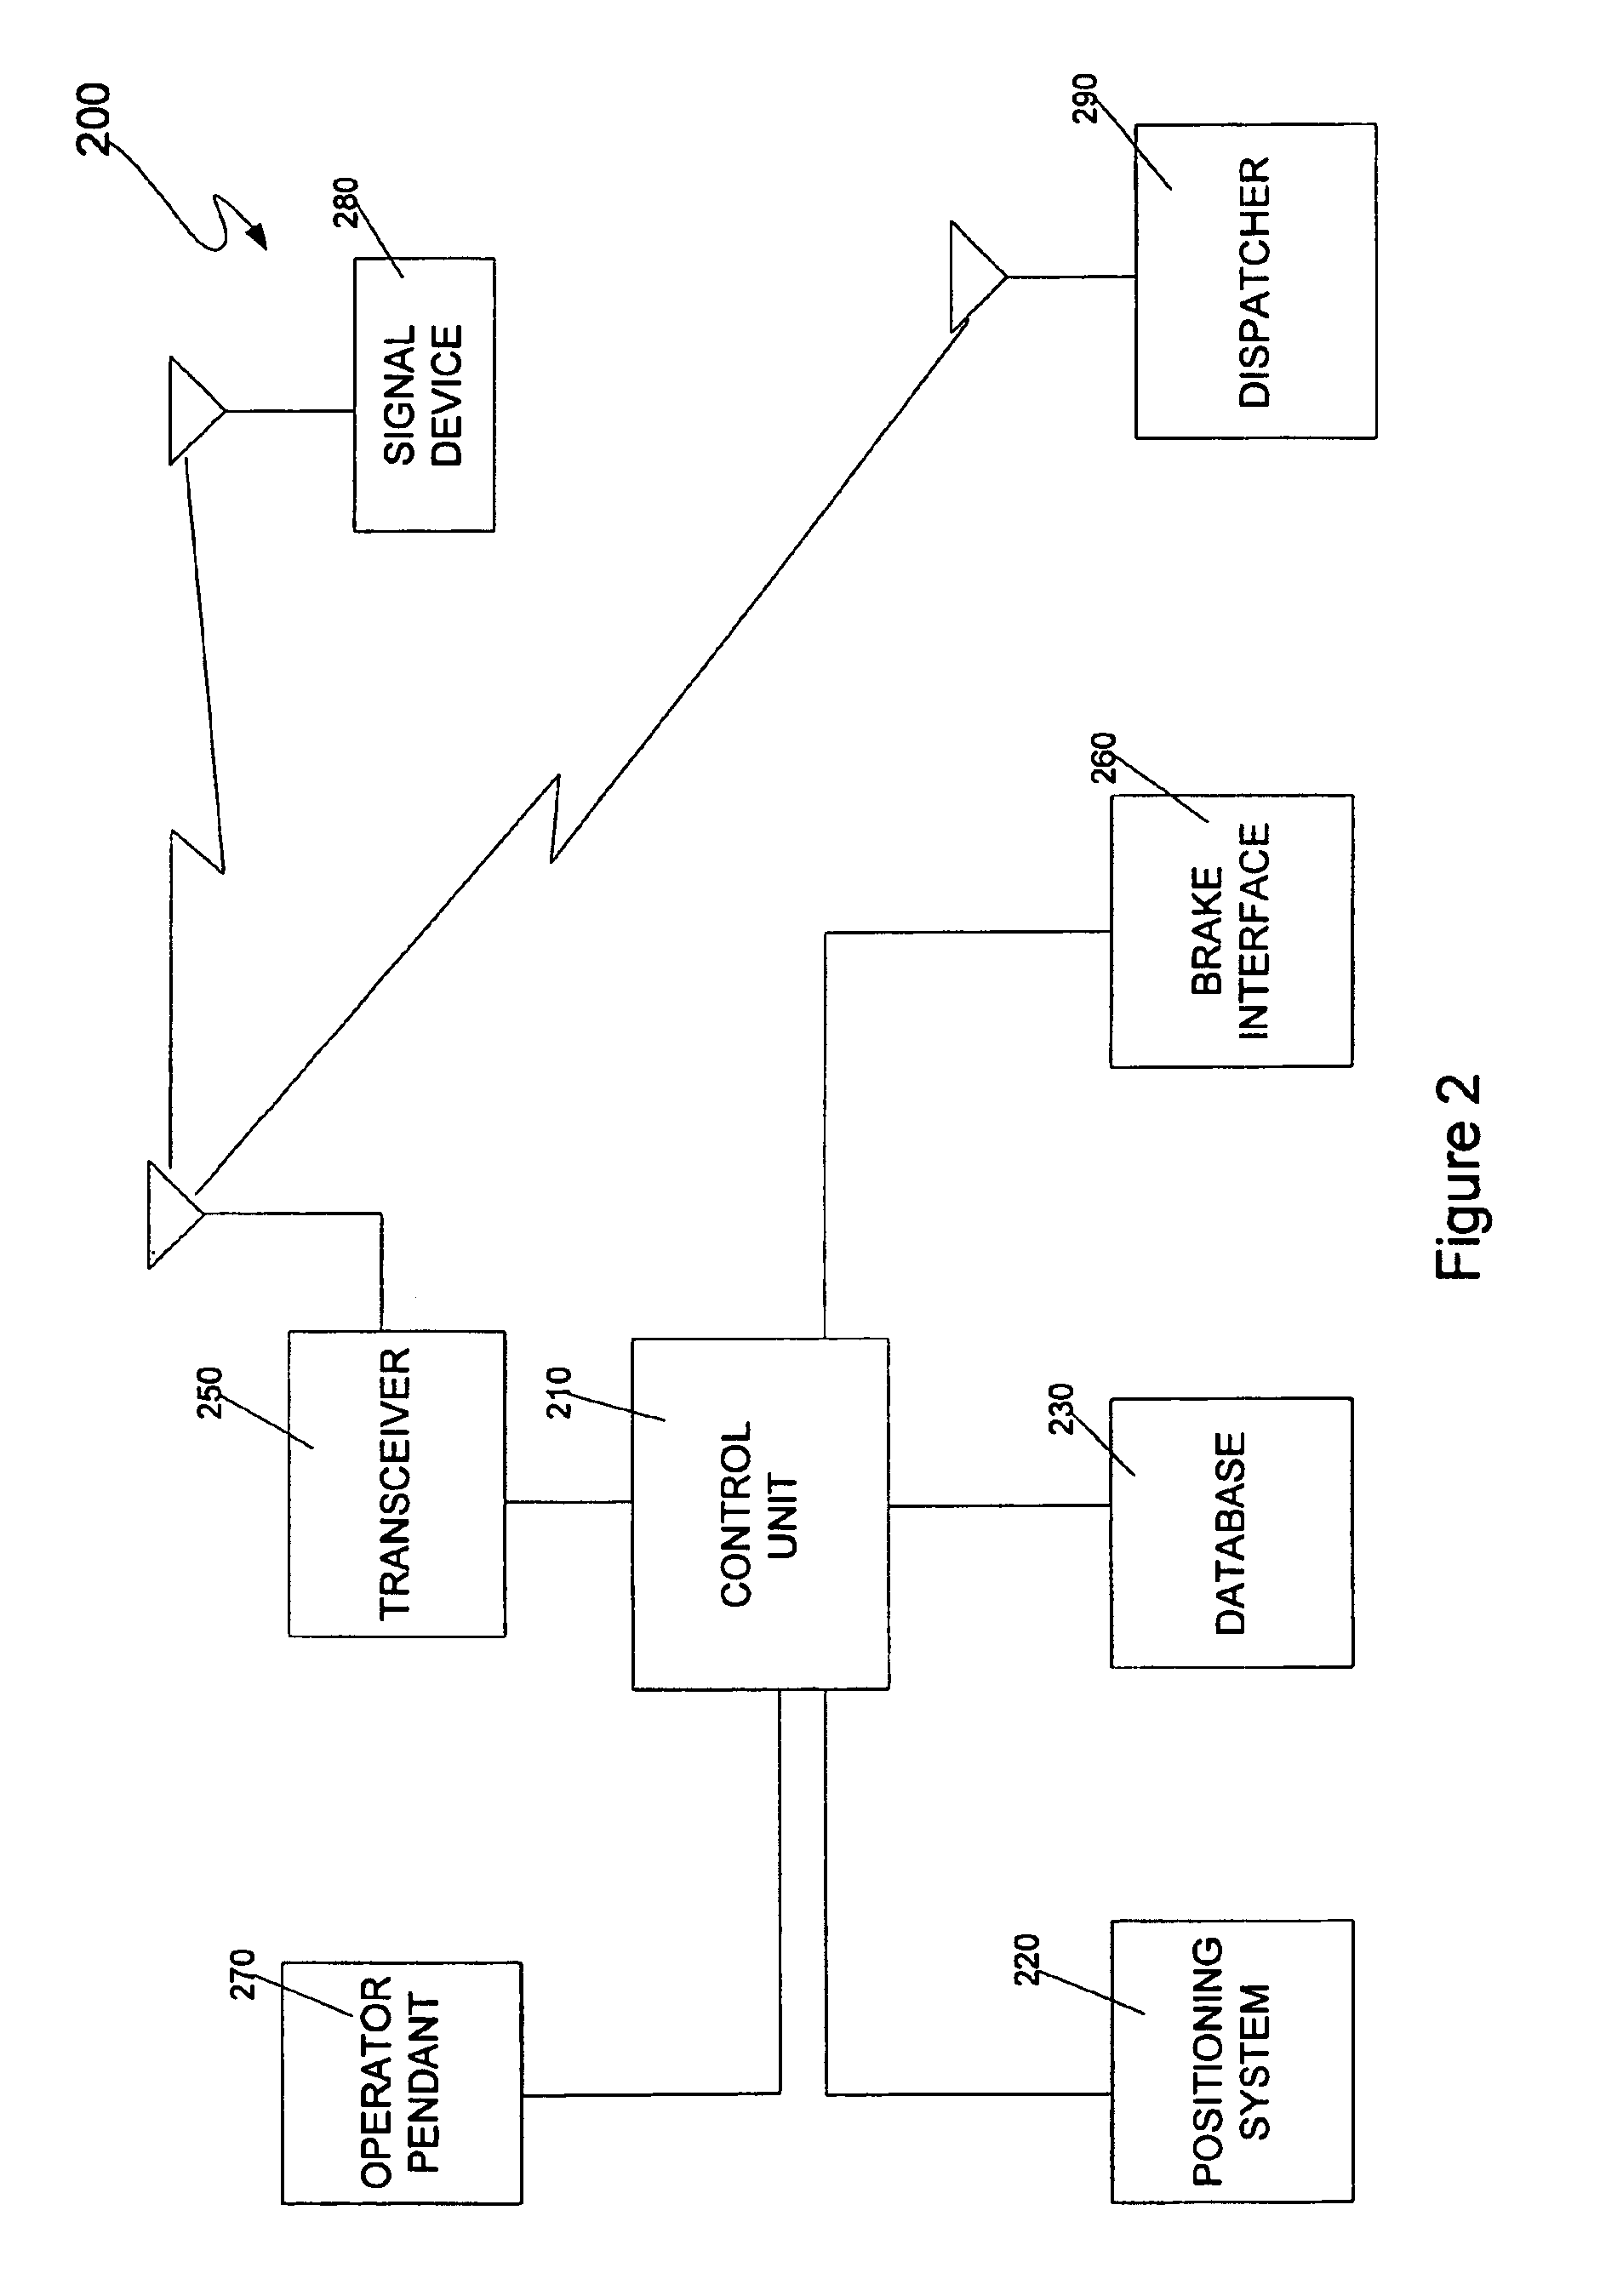 Lifting restrictive signaling in a block